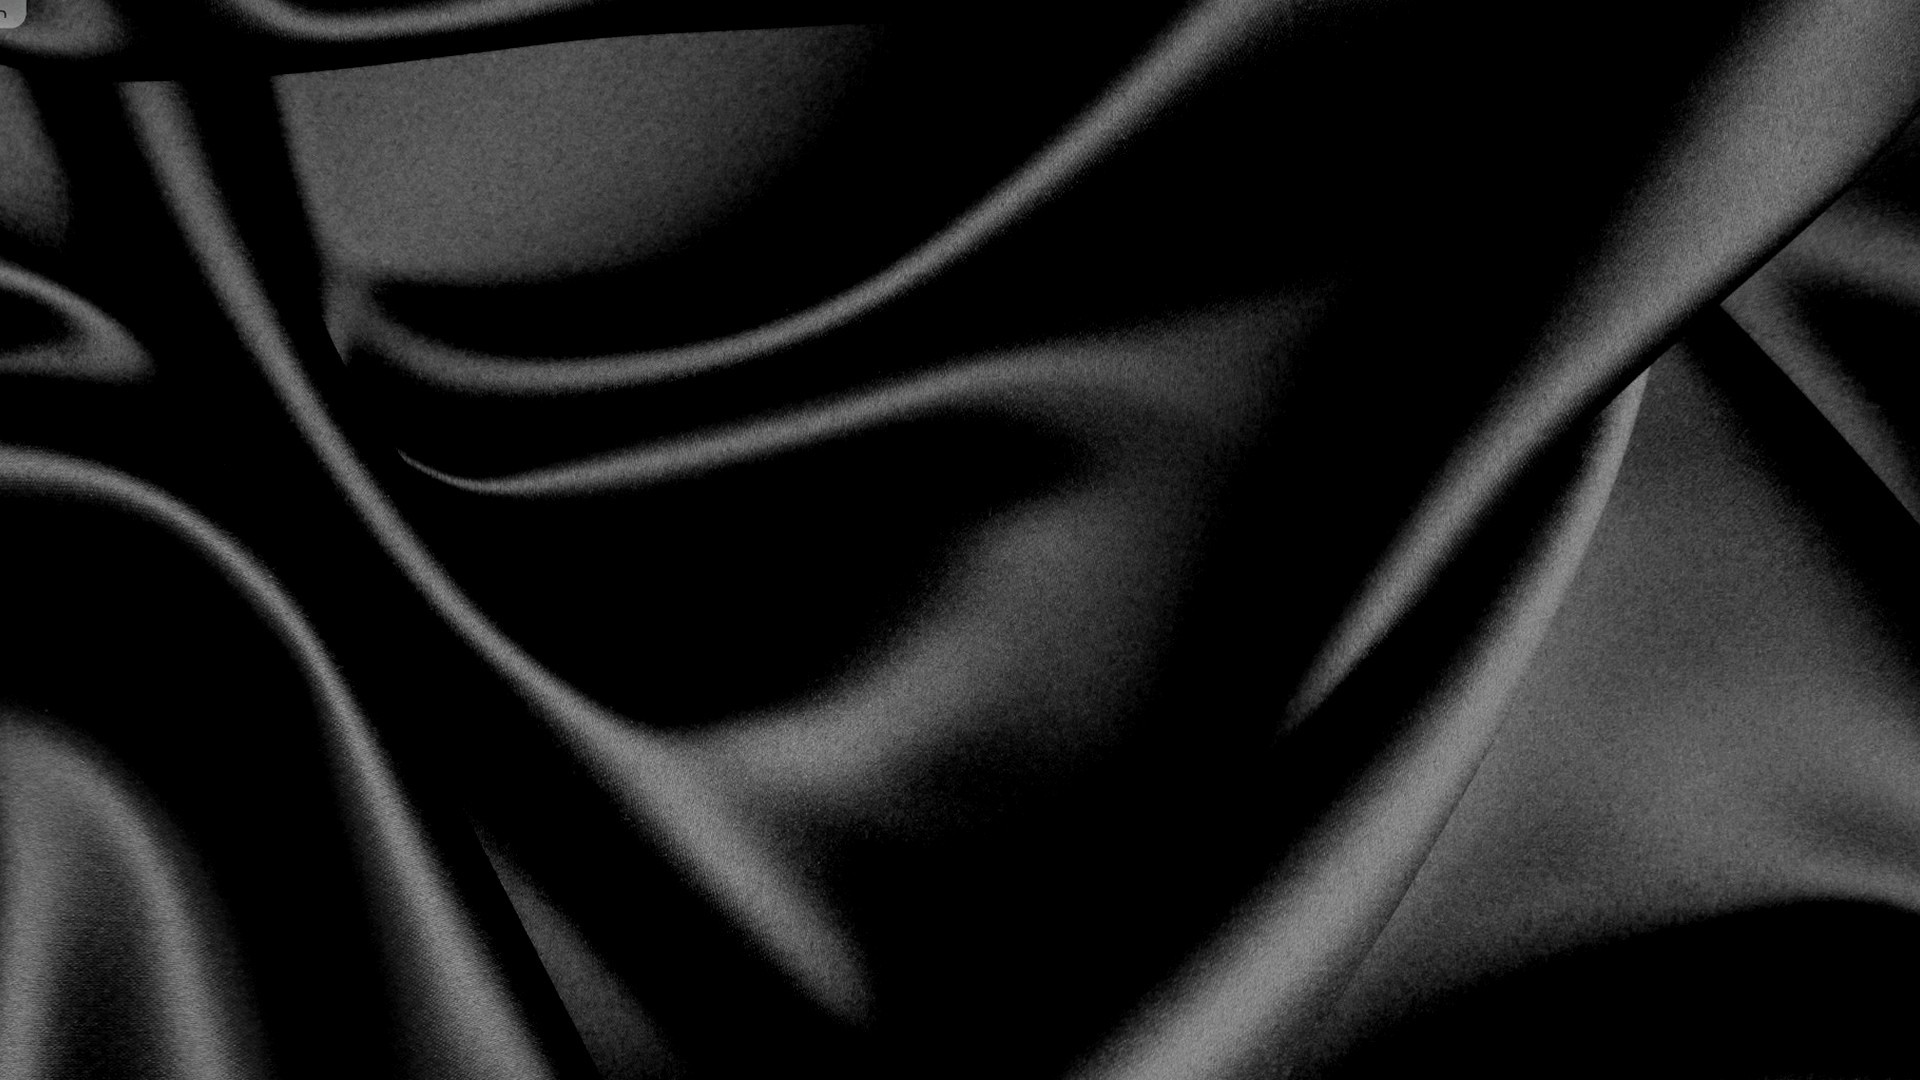 Black Silk Backgrounds For Android with high-resolution 1920x1080 pixel. You can use this wallpaper for your Android backgrounds, Tablet, Samsung Screensavers, Mobile Phone Lock Screen and another Smartphones device